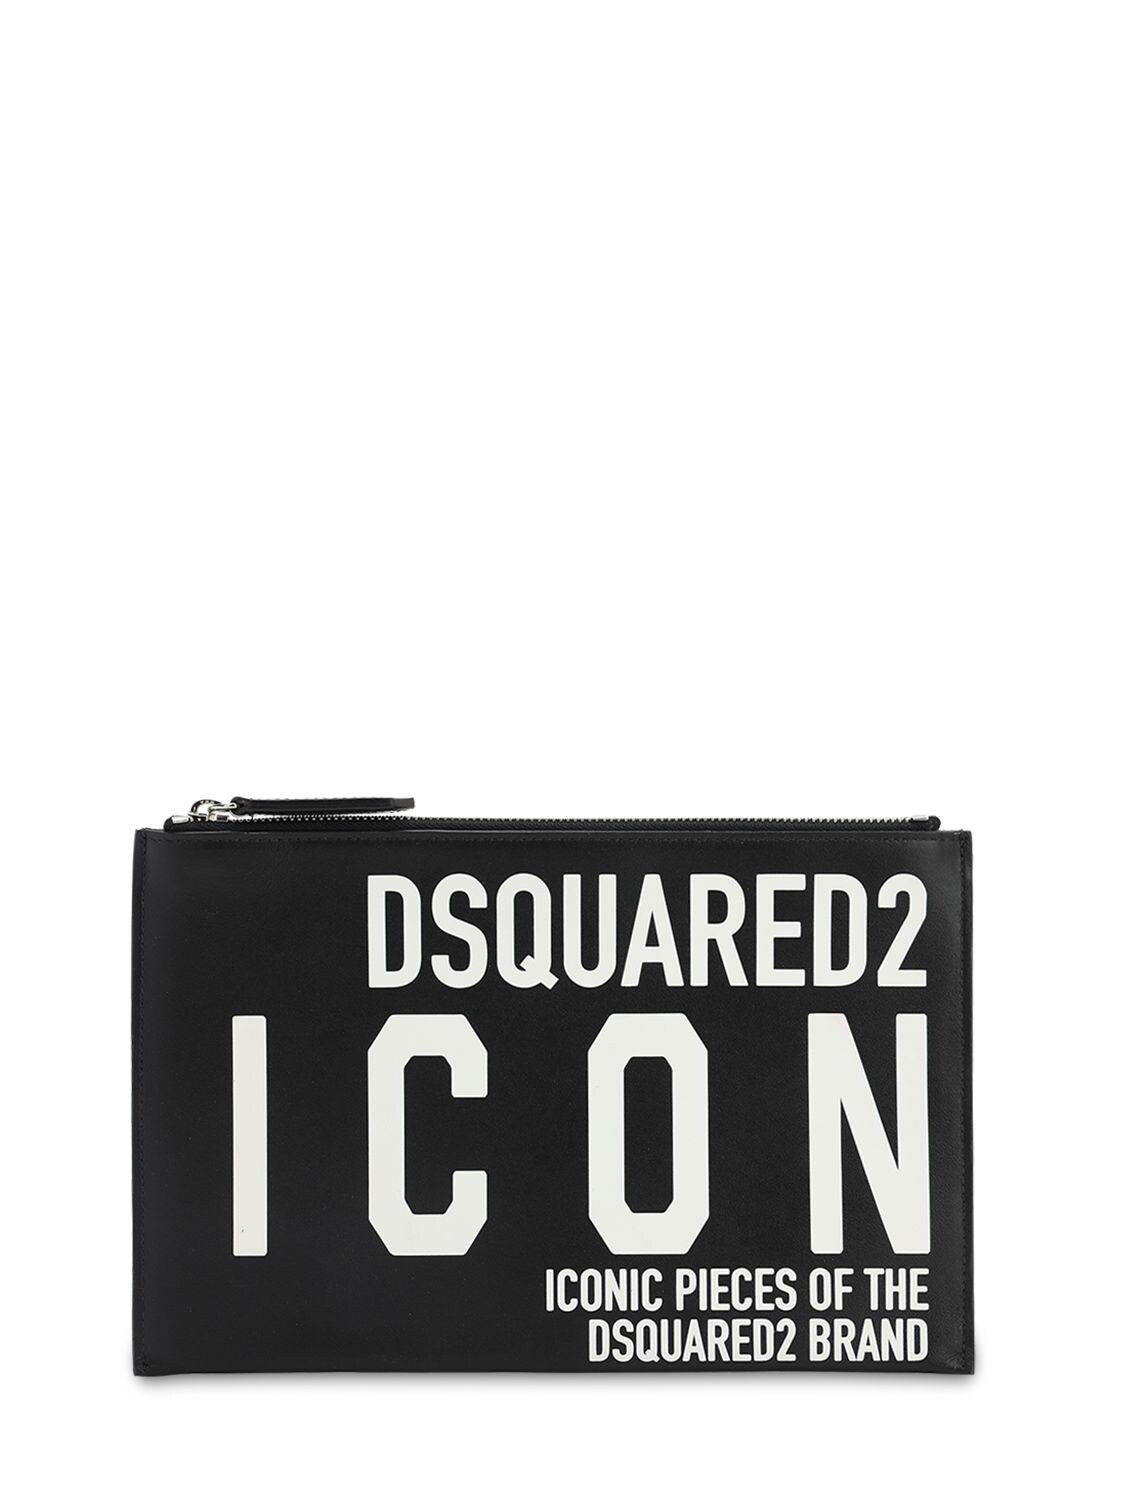 DSQUARED2 ICON PRINTED LEATHER POUCH,71IA0Y002-TTA2MW2